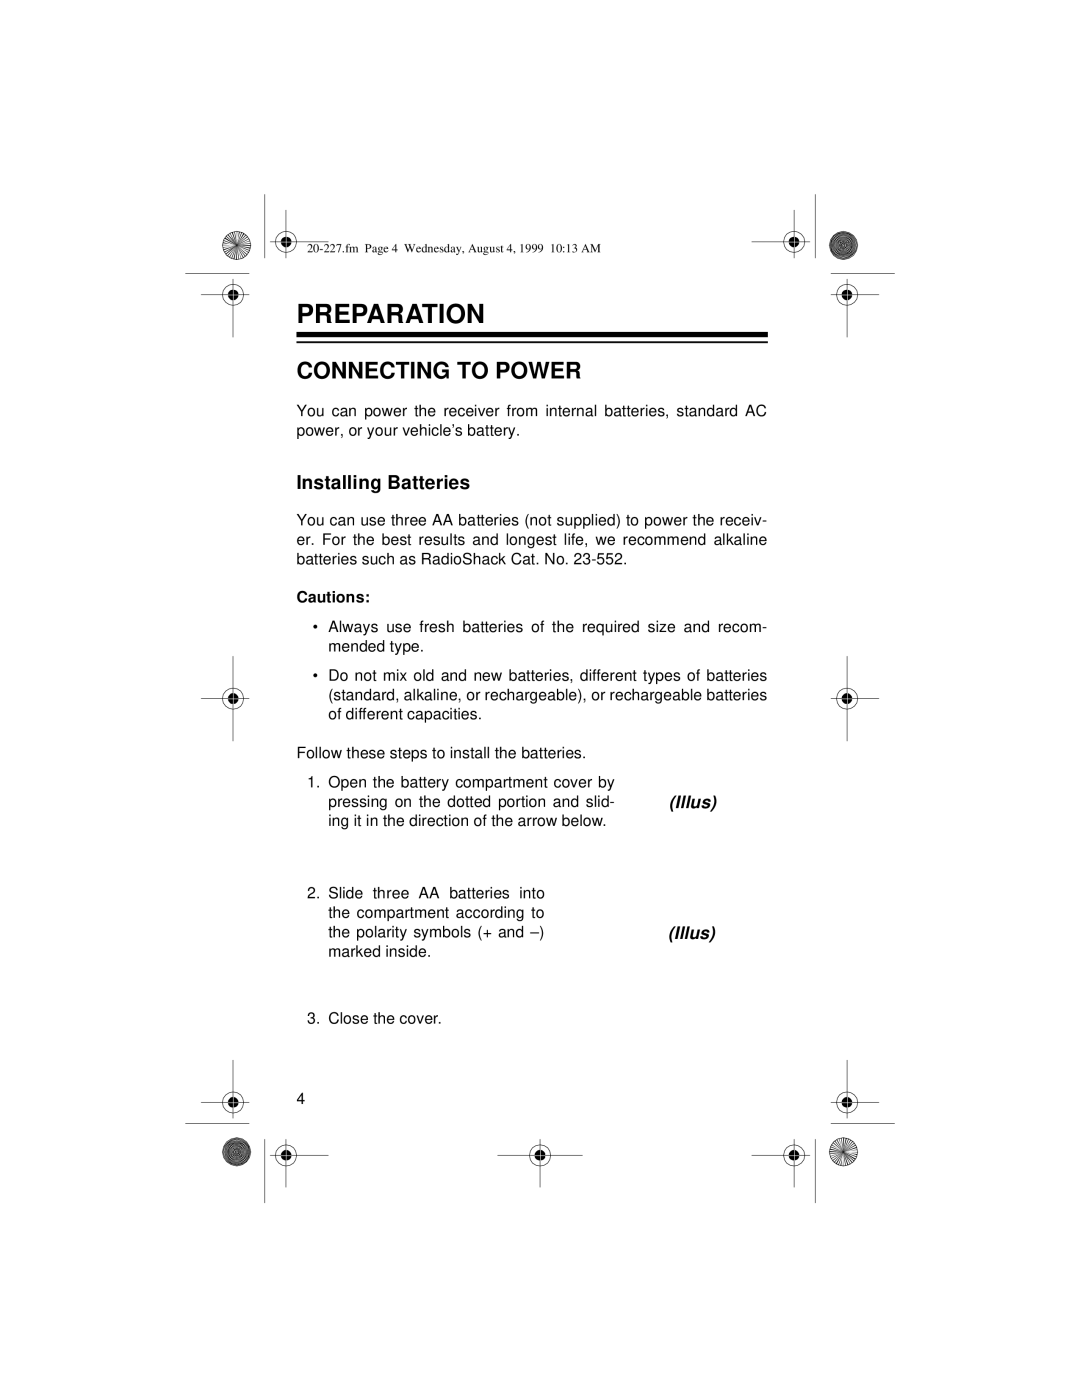 Radio Shack DX-397 owner manual Preparation, Connecting To Power, Installing Batteries, Illus, Cautions 